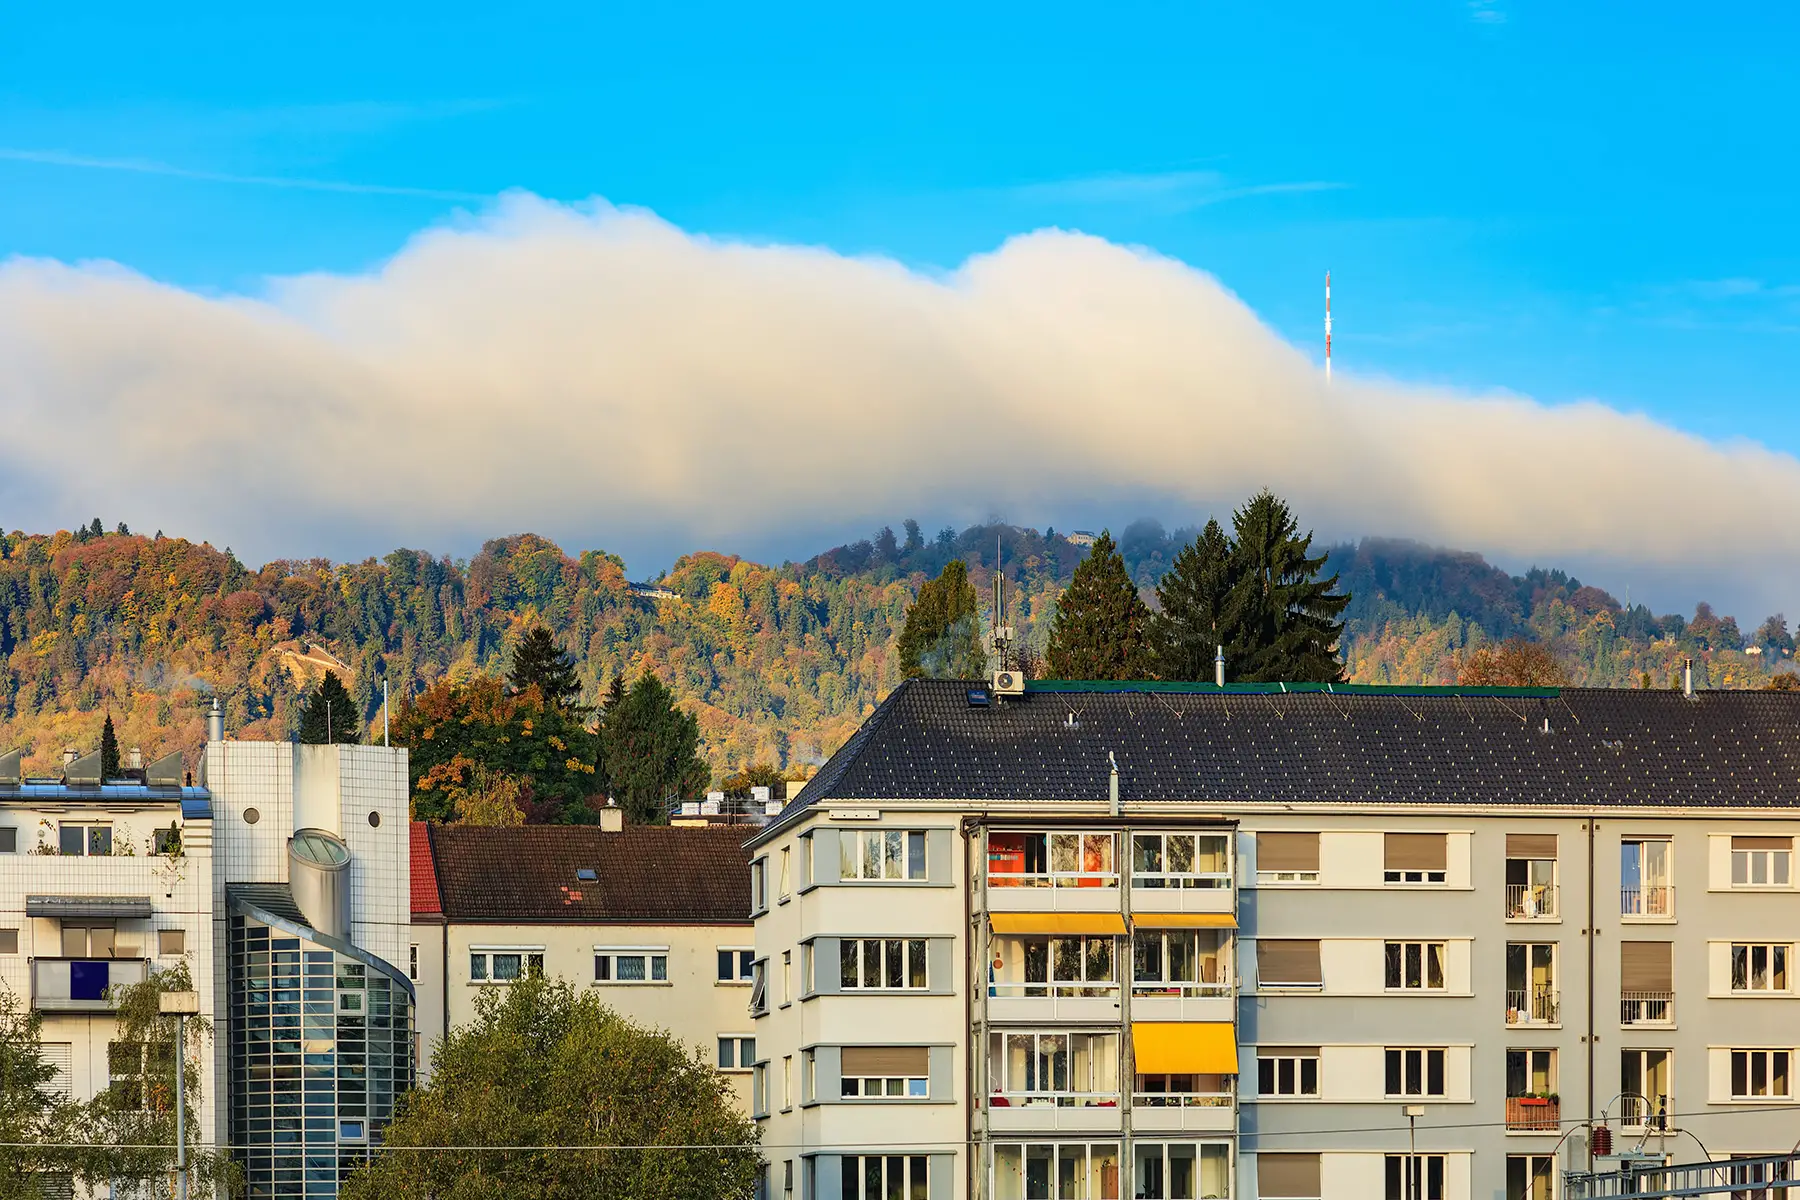 Apartment buildings in Zurich